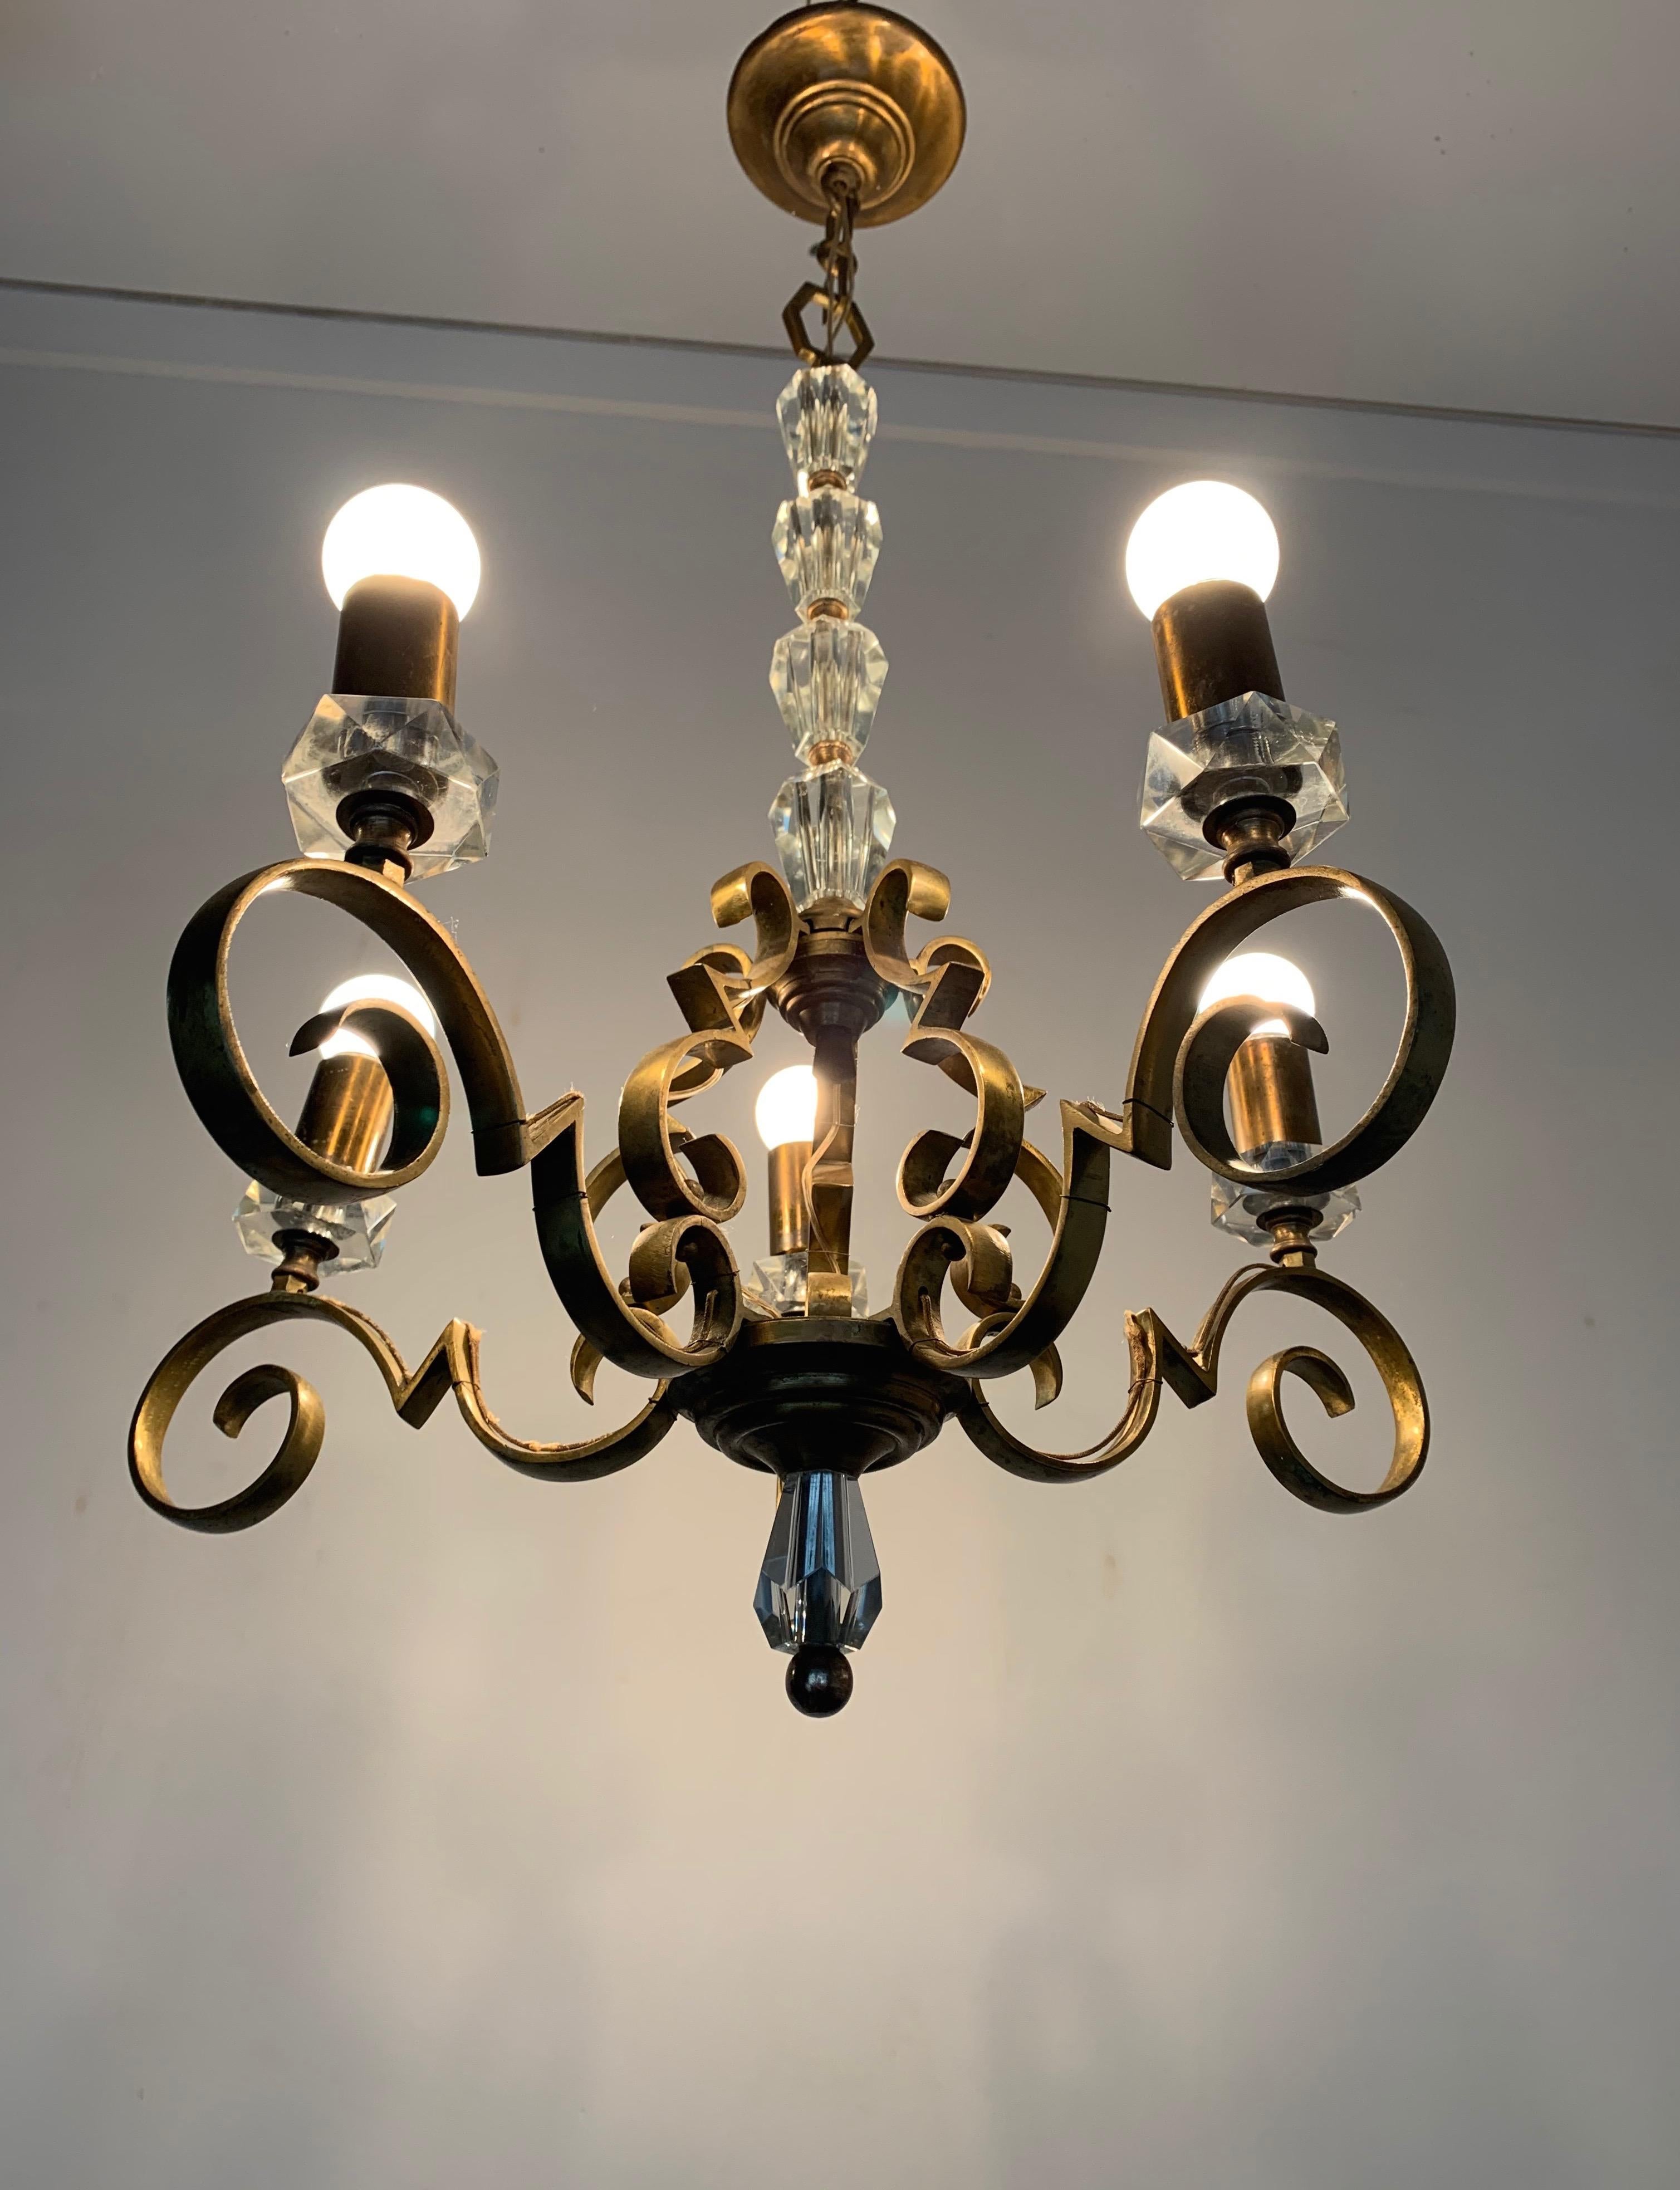 Rare and Handcrafted Jule Leleu Style 5 Light Bronze & Glass Art Deco Chandelier For Sale 1